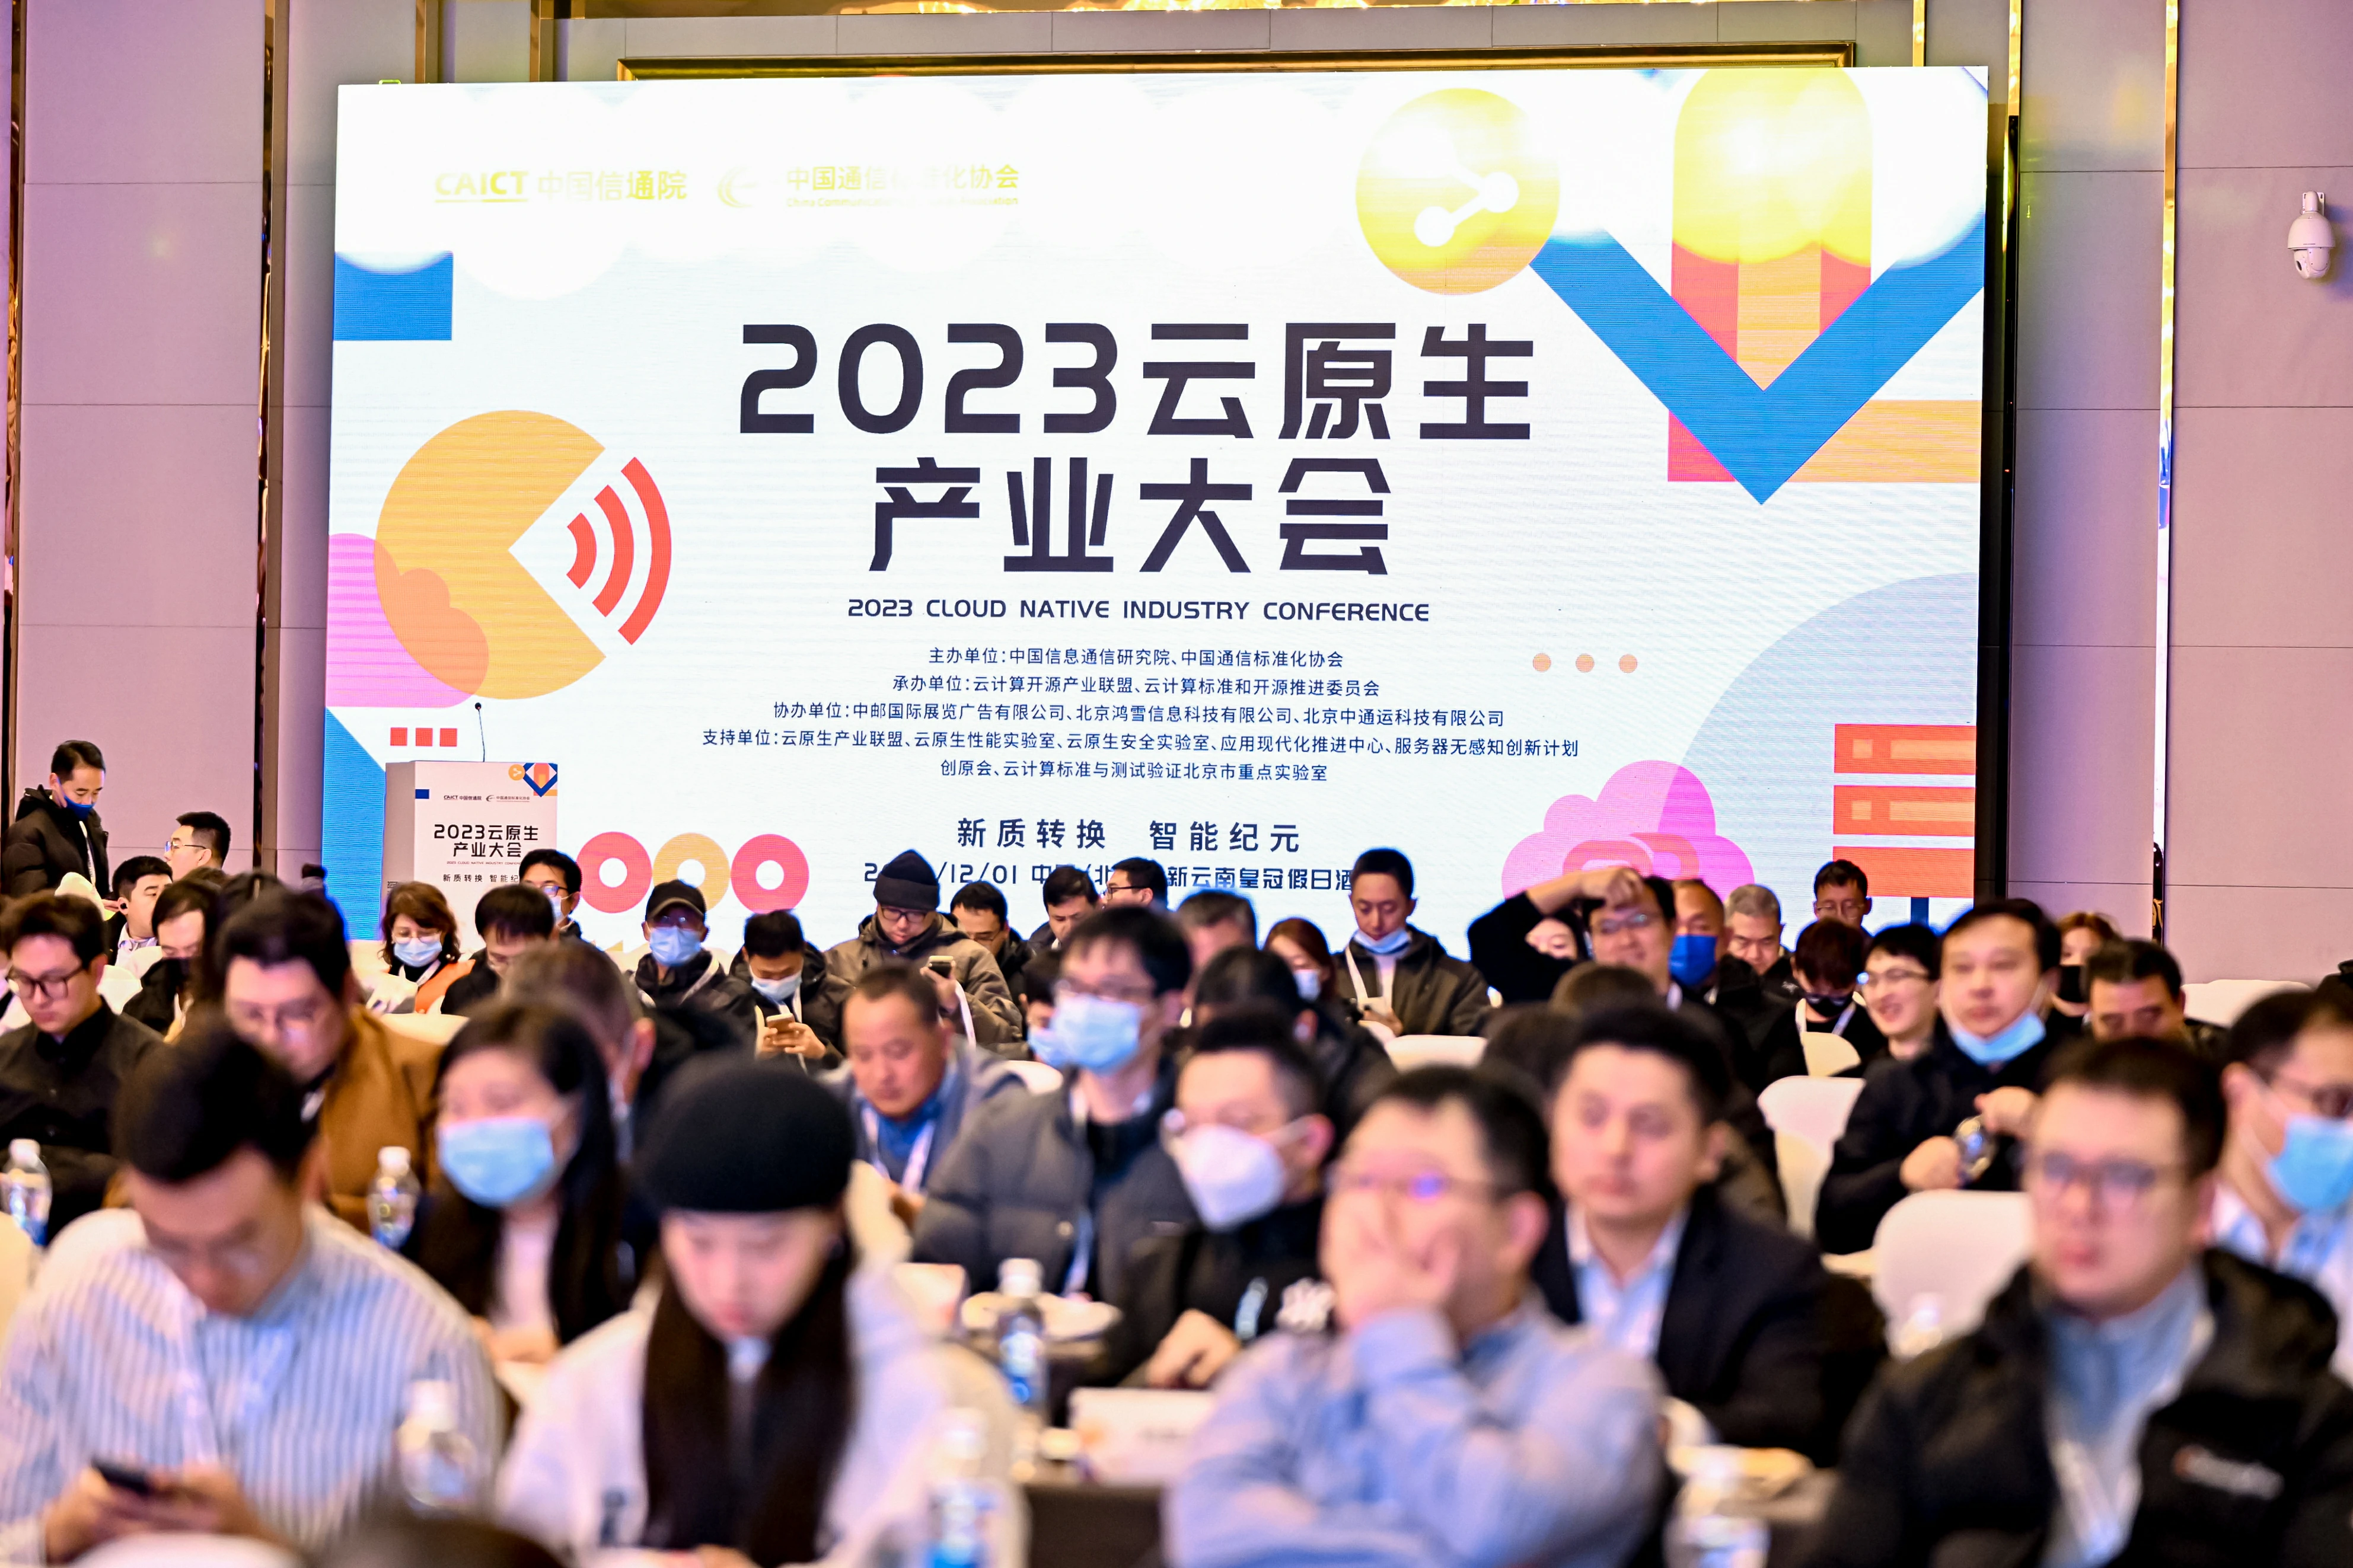 2023 Cloud Native Industry Conference.jpg